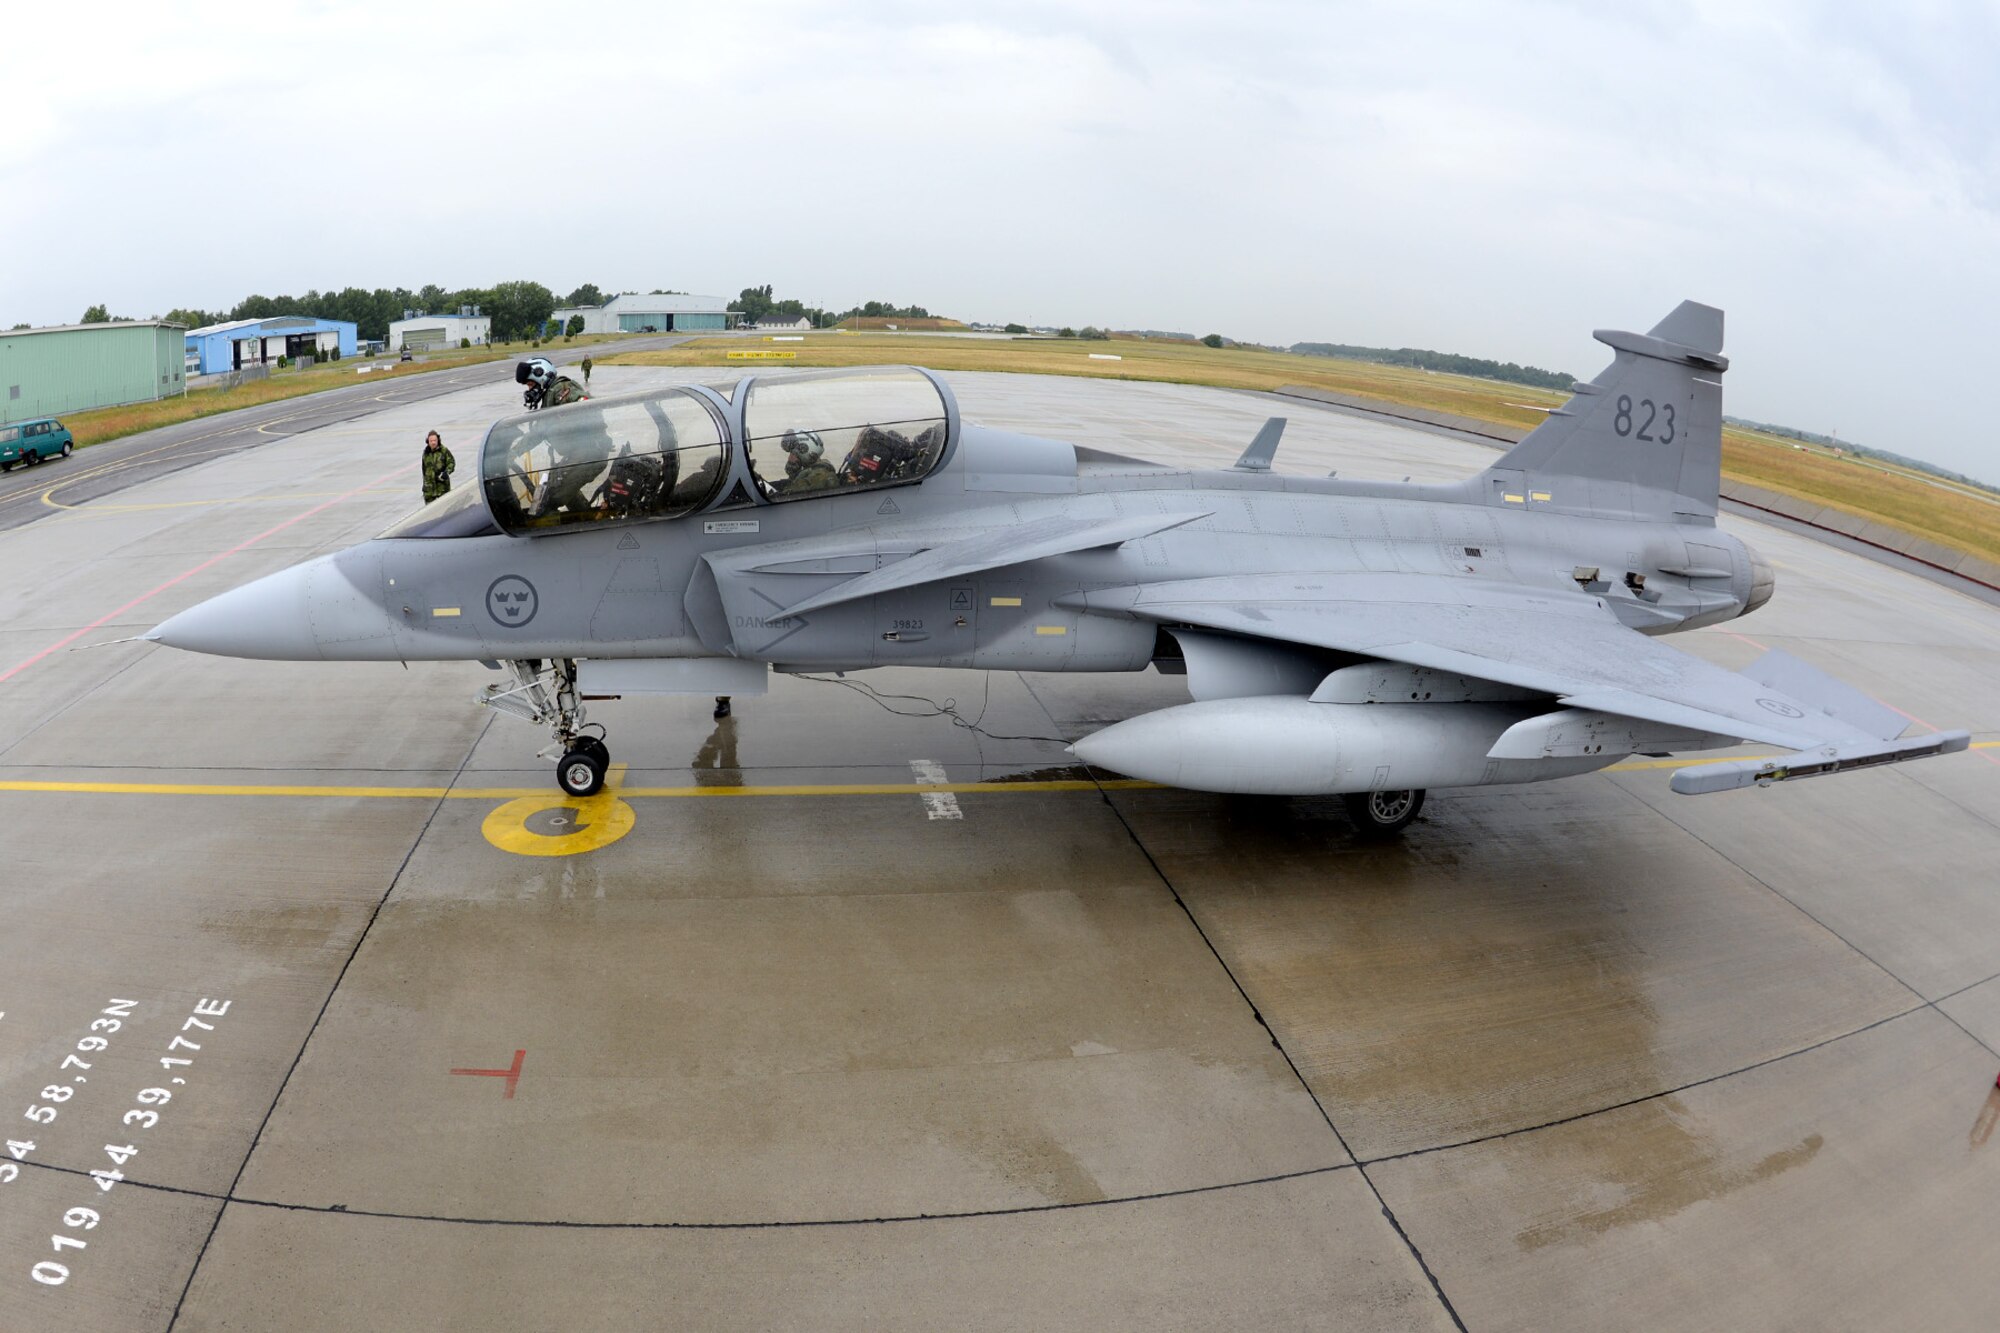 Hungarian and Swedish air force JAS-39 Gripen pilots board their jet June 24, 2015, during air refueling familiarization training on Kecskemét air base, Hungary. Hungarian, U.S. and Swedish air force personnel met for a two-week familiarization period enabling the Hungarian JAS-39 Gripen pilots to successfully perform air refueling for the first time. (U.S. Air Force photo by Senior Airman Kate Thornton/Released)